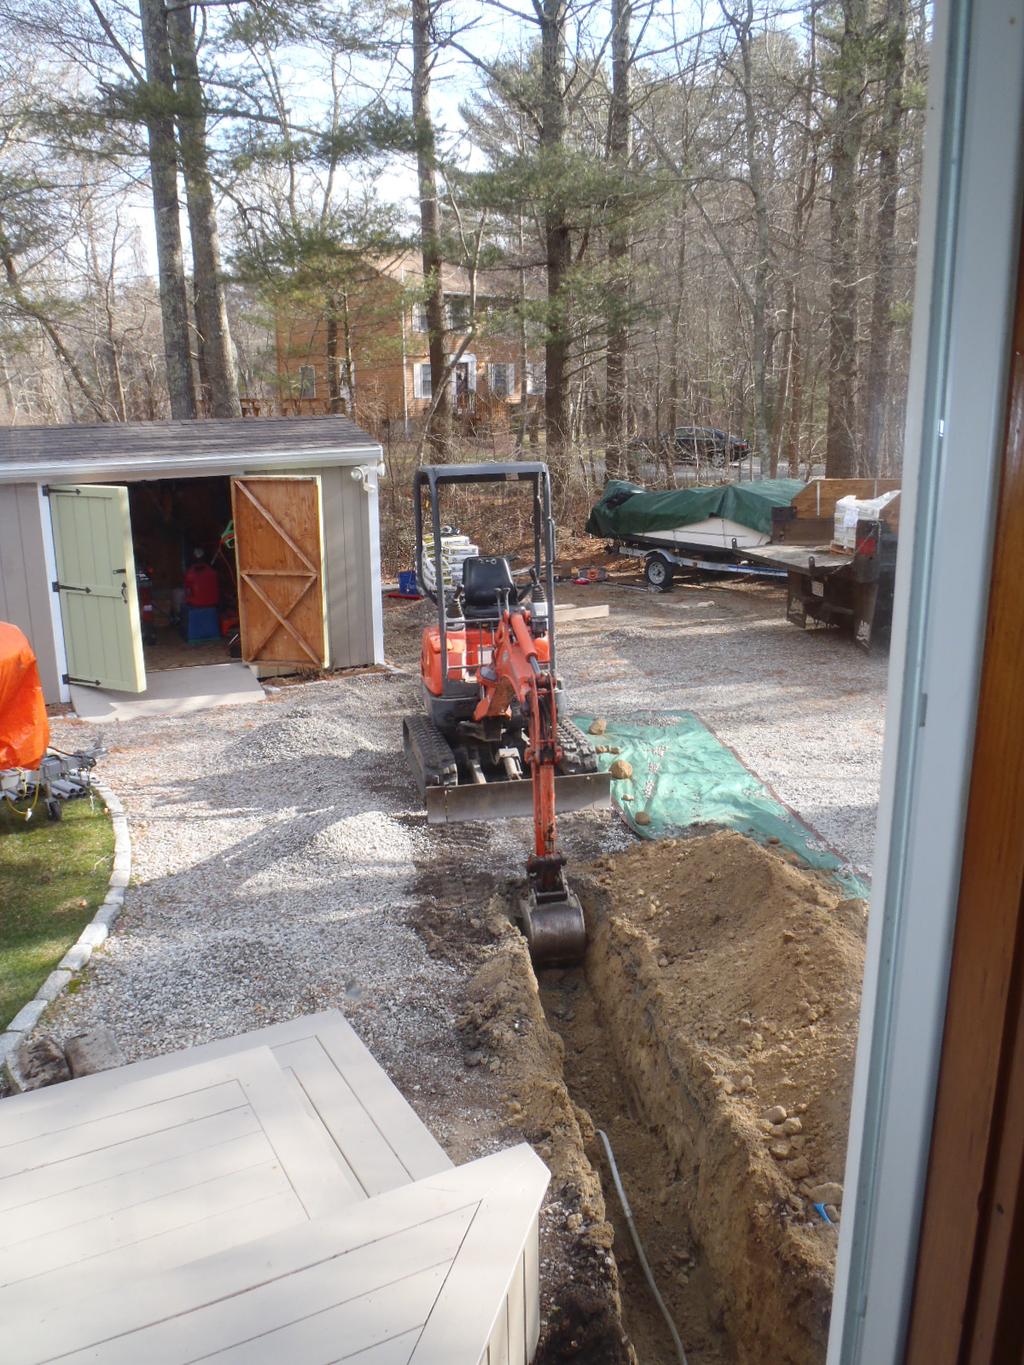 The Installation Paul Foley electric took care of all the permits including contacting Dig Safe so that they could safely dig a trench that would bring the generator